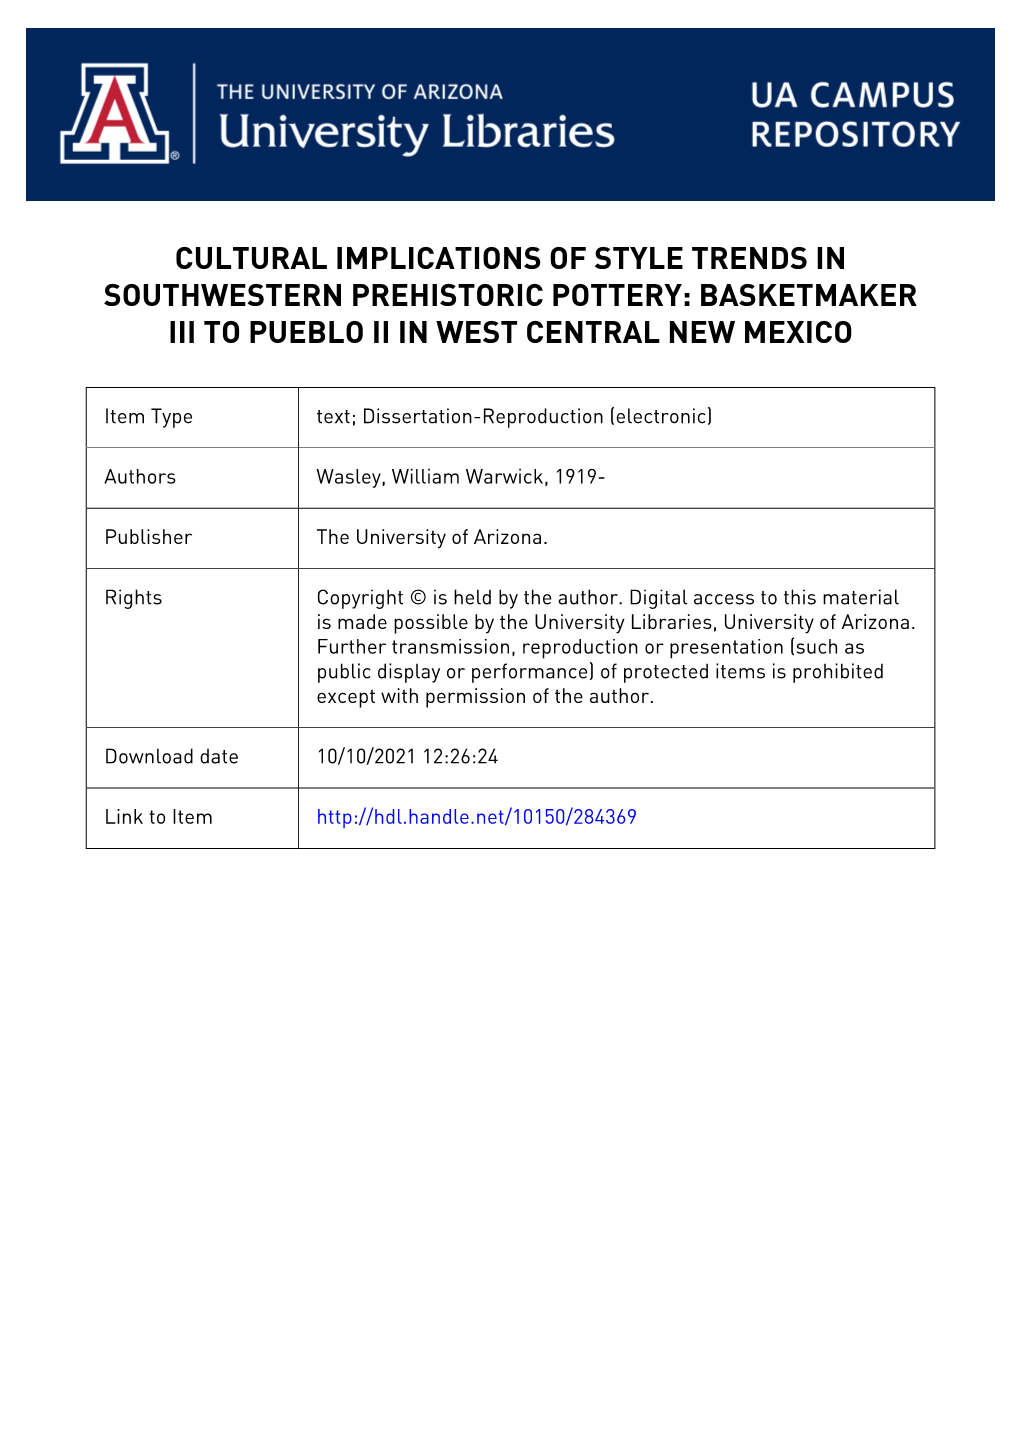 Cultural Implications of Style Trends in Southwestern Prehistoric Pottery: Basketmaker Iii to Pueblo Ii in West Central New Mexico